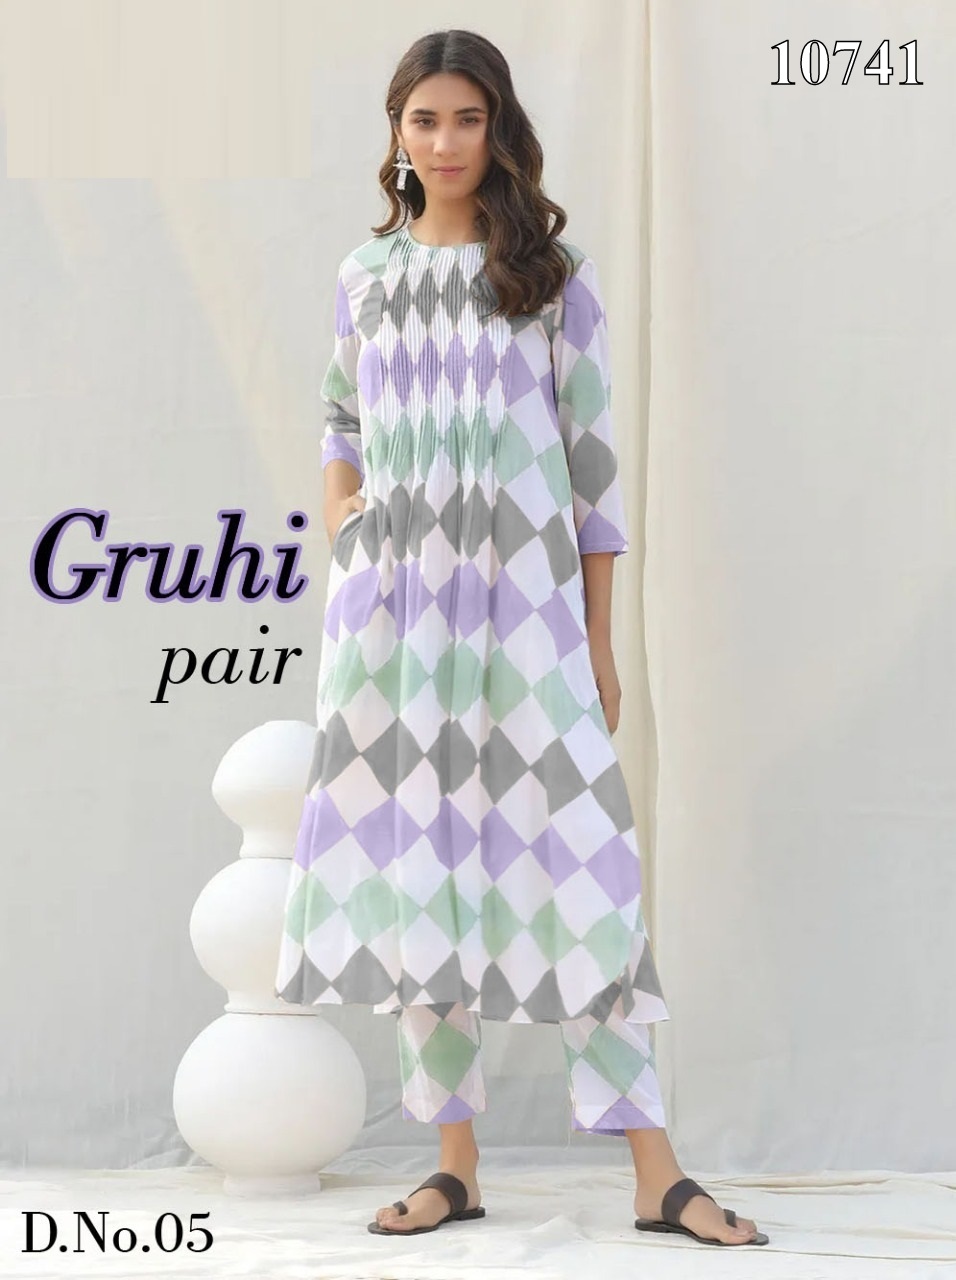 10 Best Kurtis Online in 2022 to Add that Elegance and Leave an Impression  Looking Good is Easy